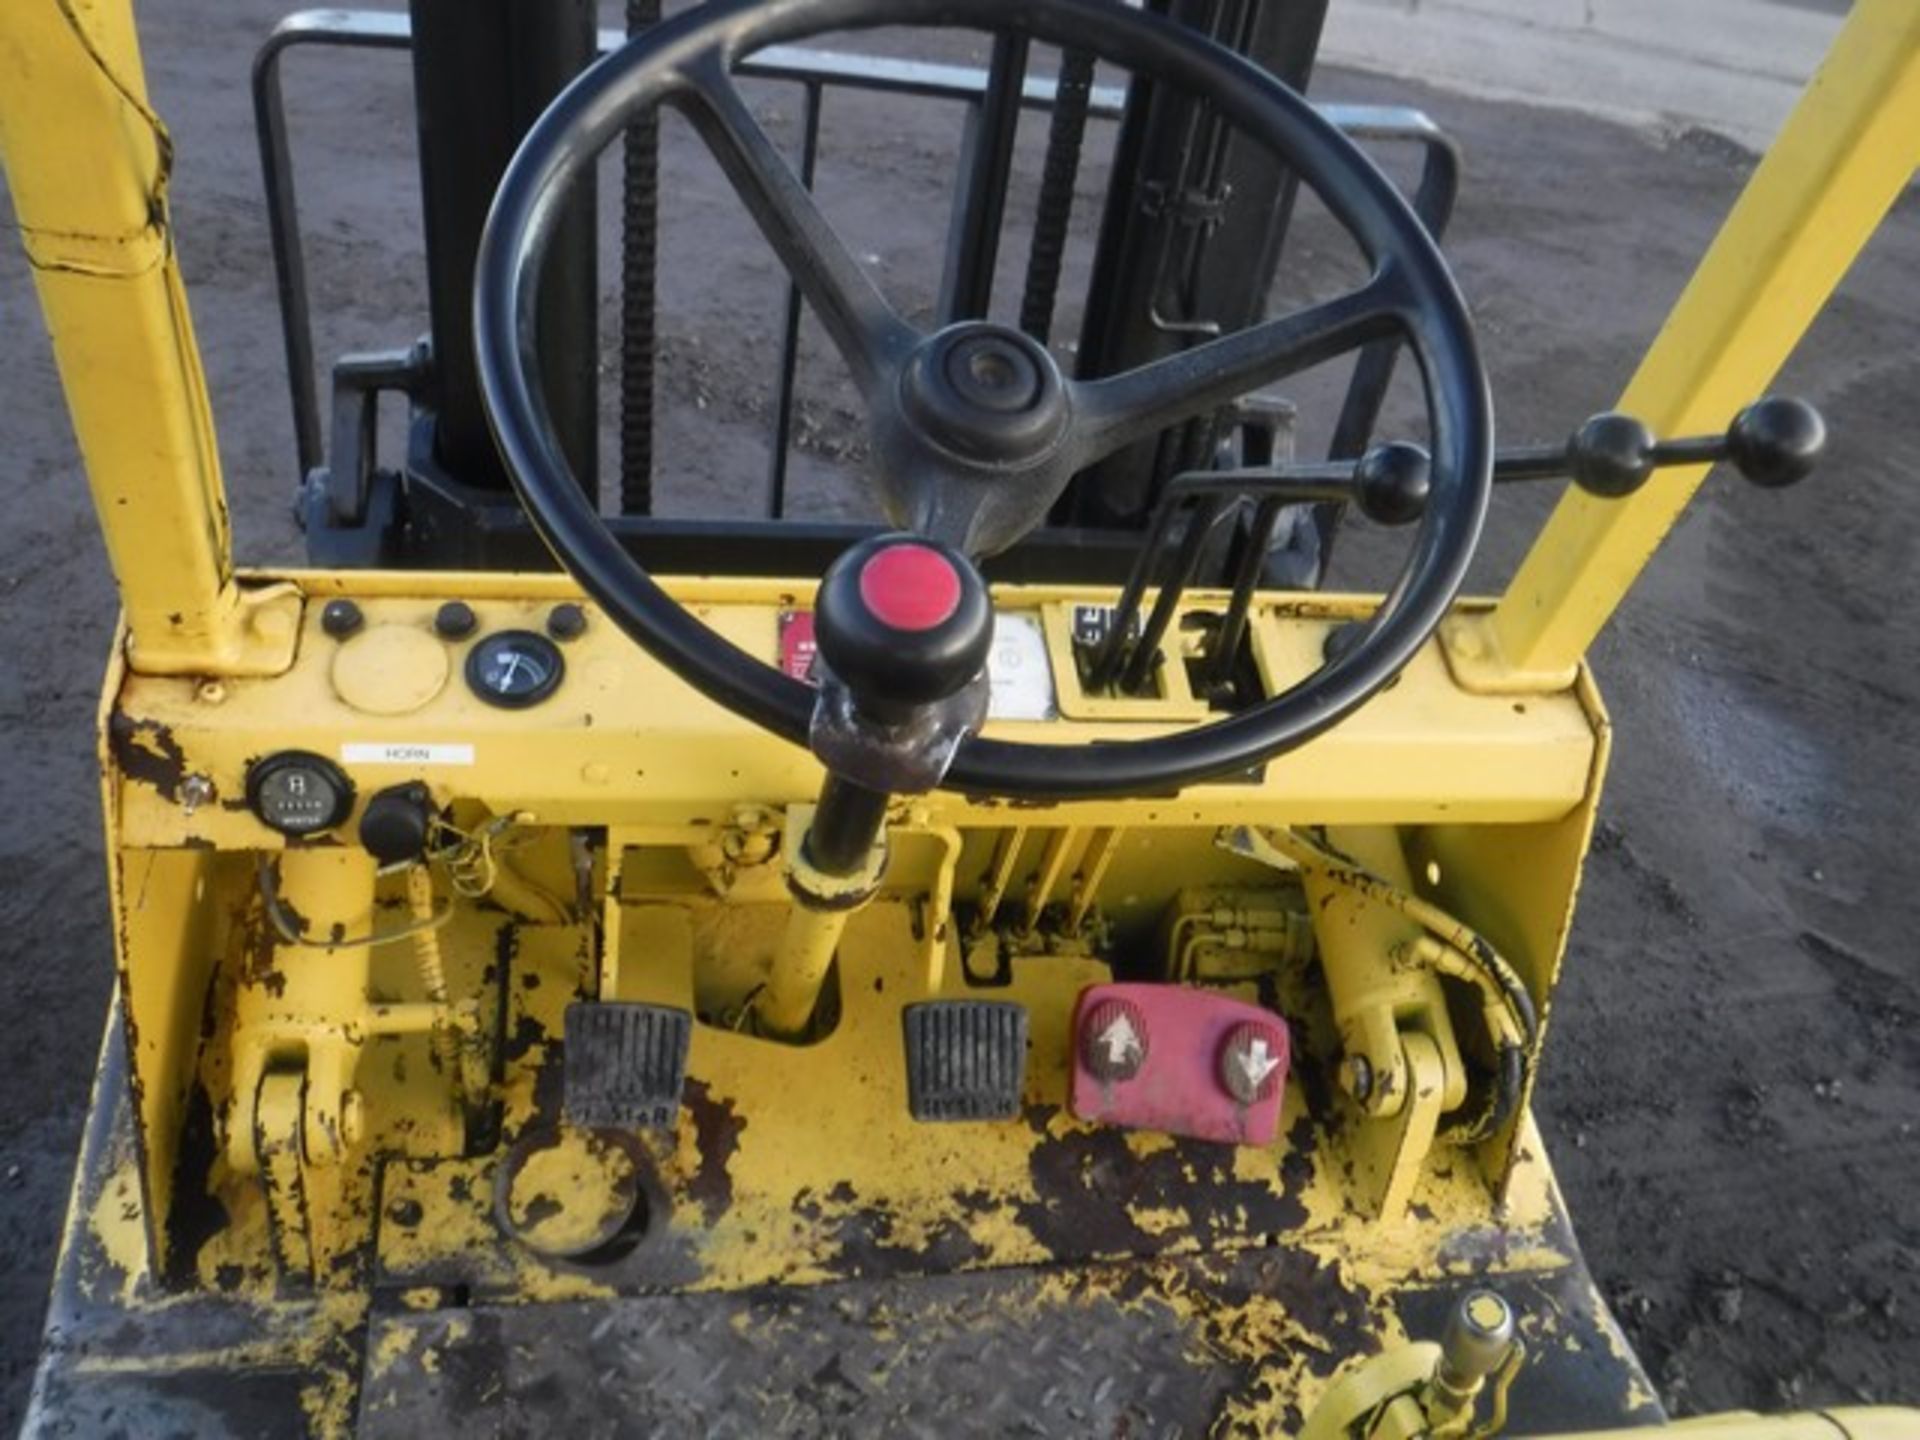 1989 HYSTER H2.50XL 2.5 tone gas forklift c/w side shift. S/NA177B36136K 650hrs (not verified) - Image 9 of 11